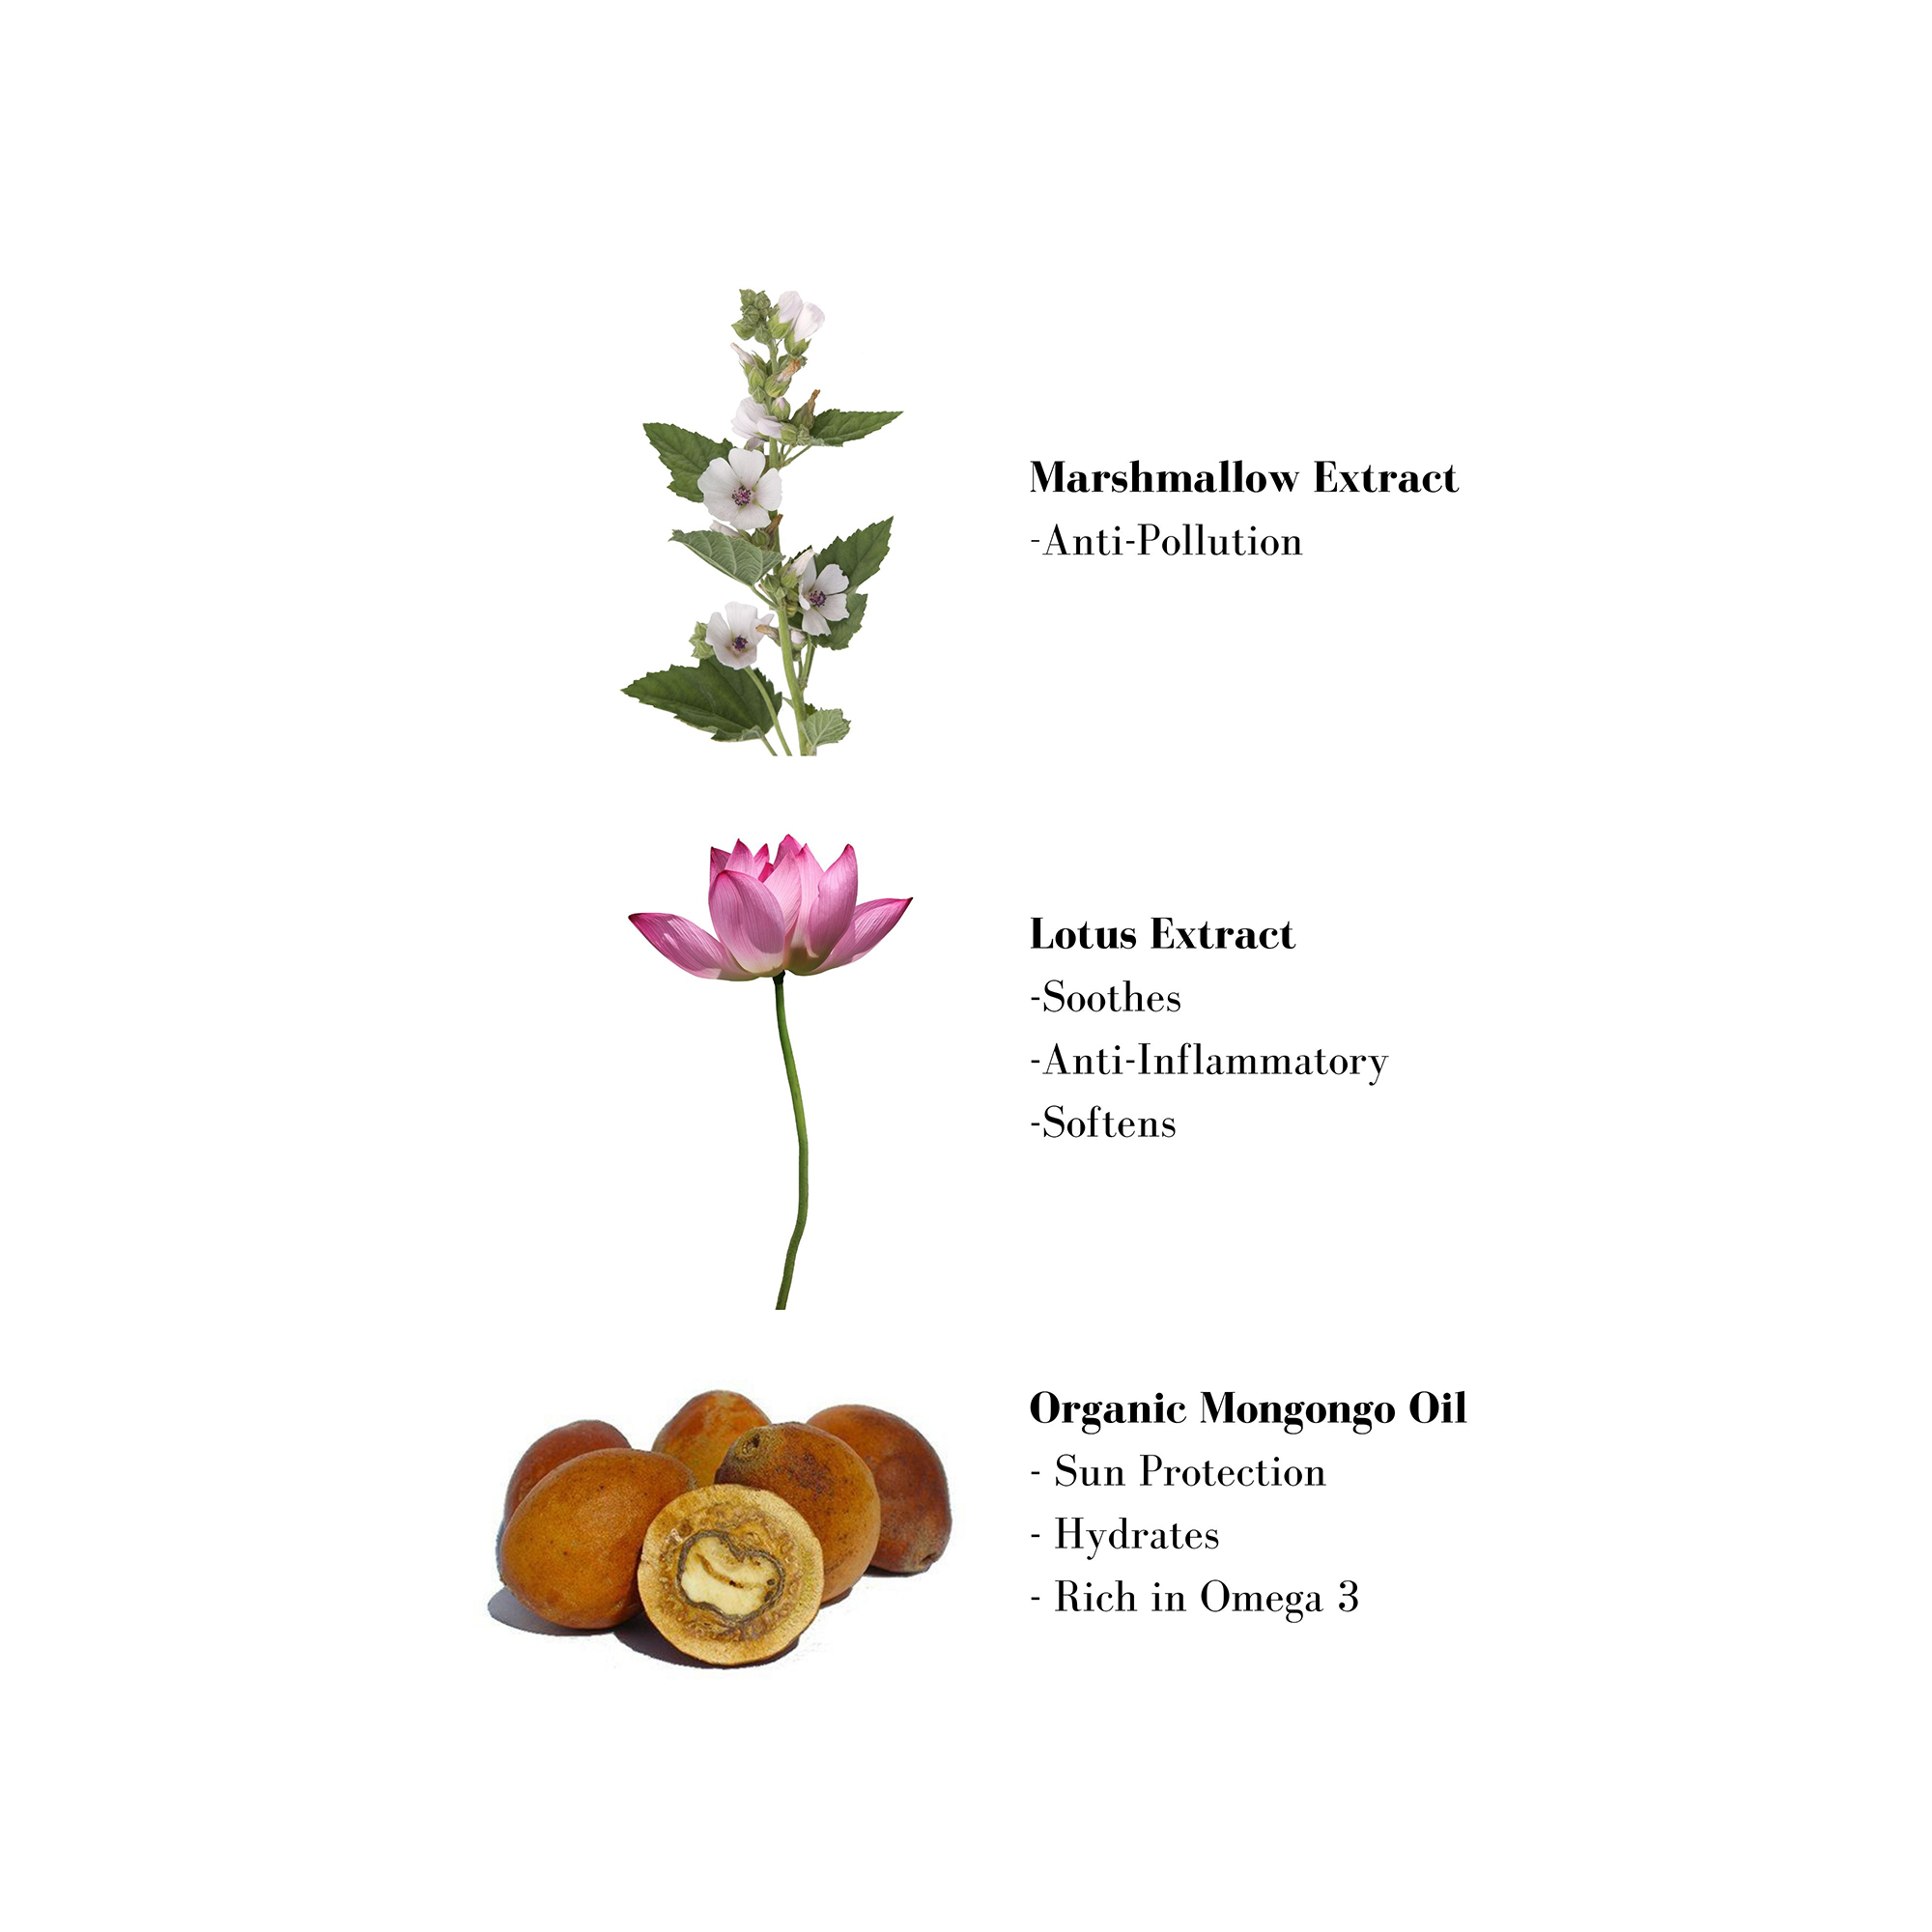 Image 1- Marshmallow Extract -Anti-Pollution Lotus Extract -Soothes -Anti-Inflammatory -Softens Organic Mongongo Oil - Sun Protection - Hydrates - Rich in Omega 3